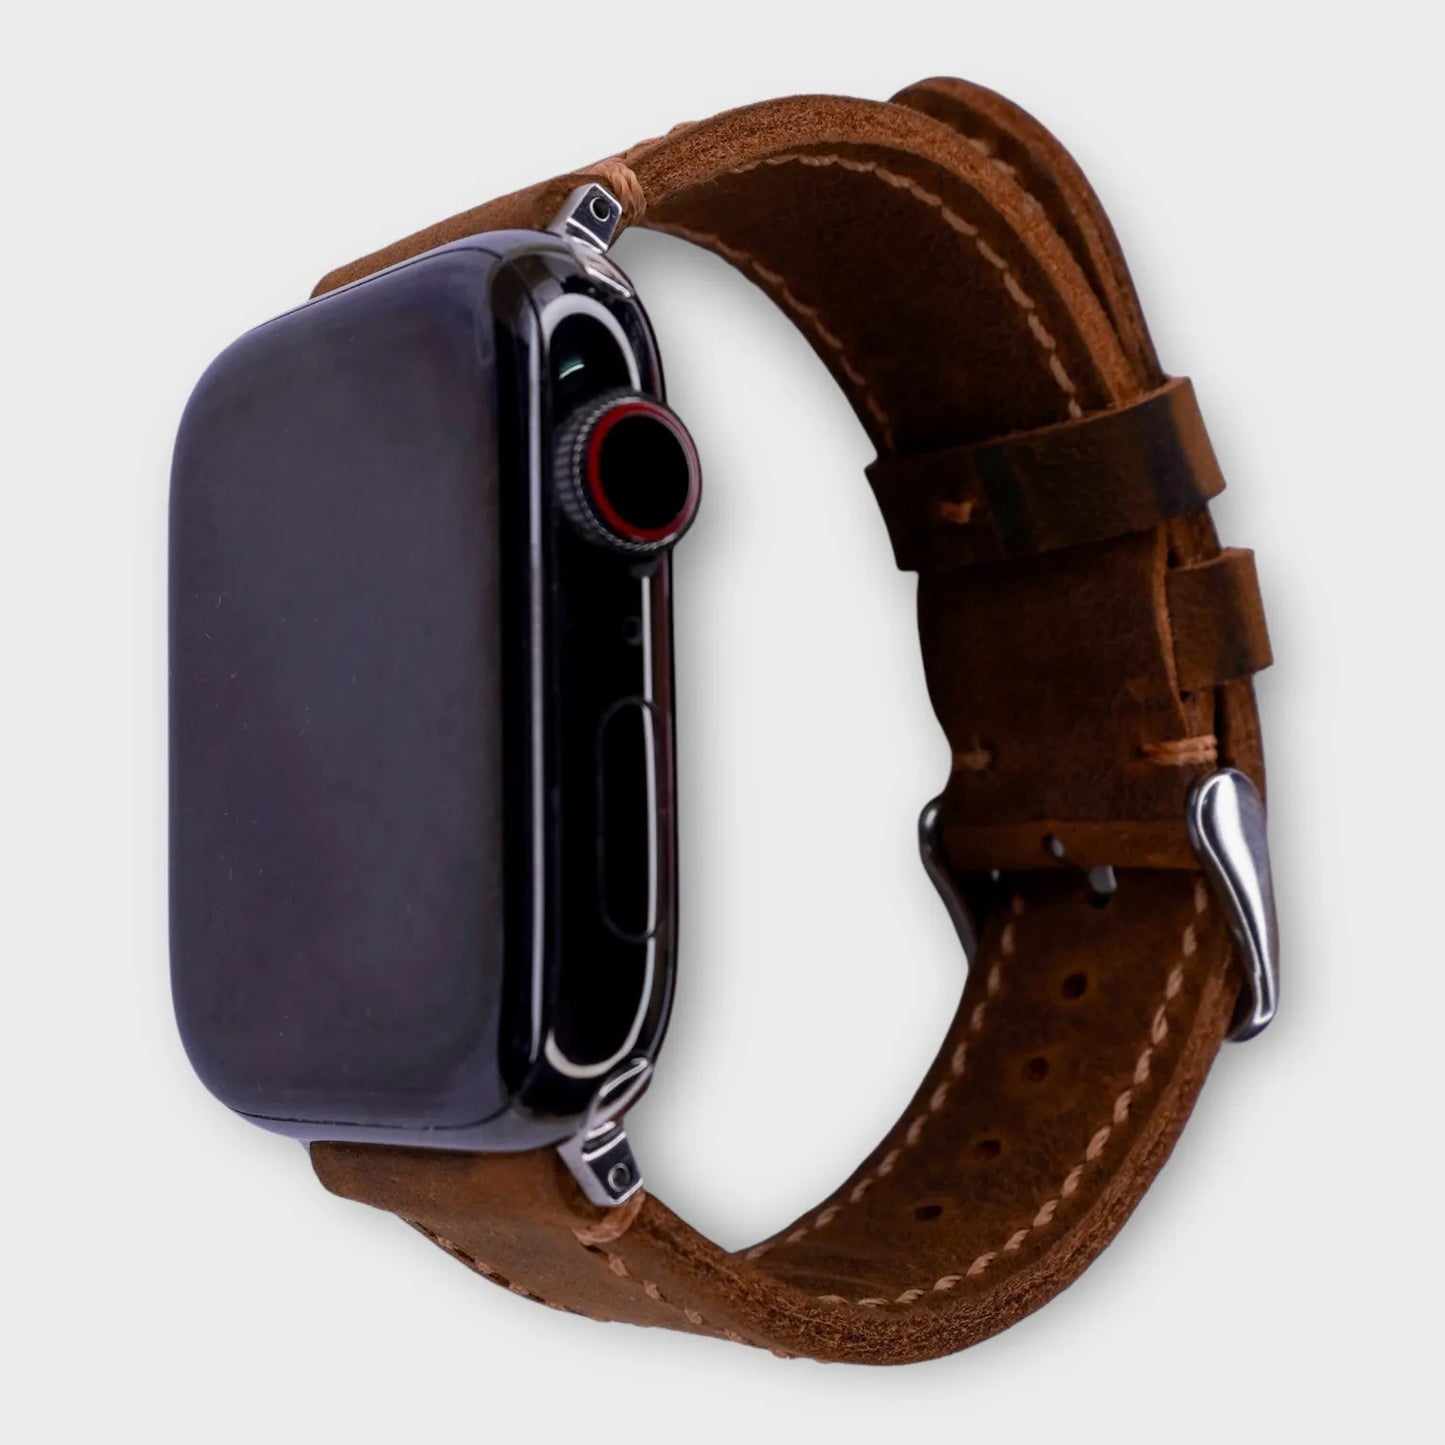 Elegant leather Apple Watch band made with high-quality brown waxy leather.